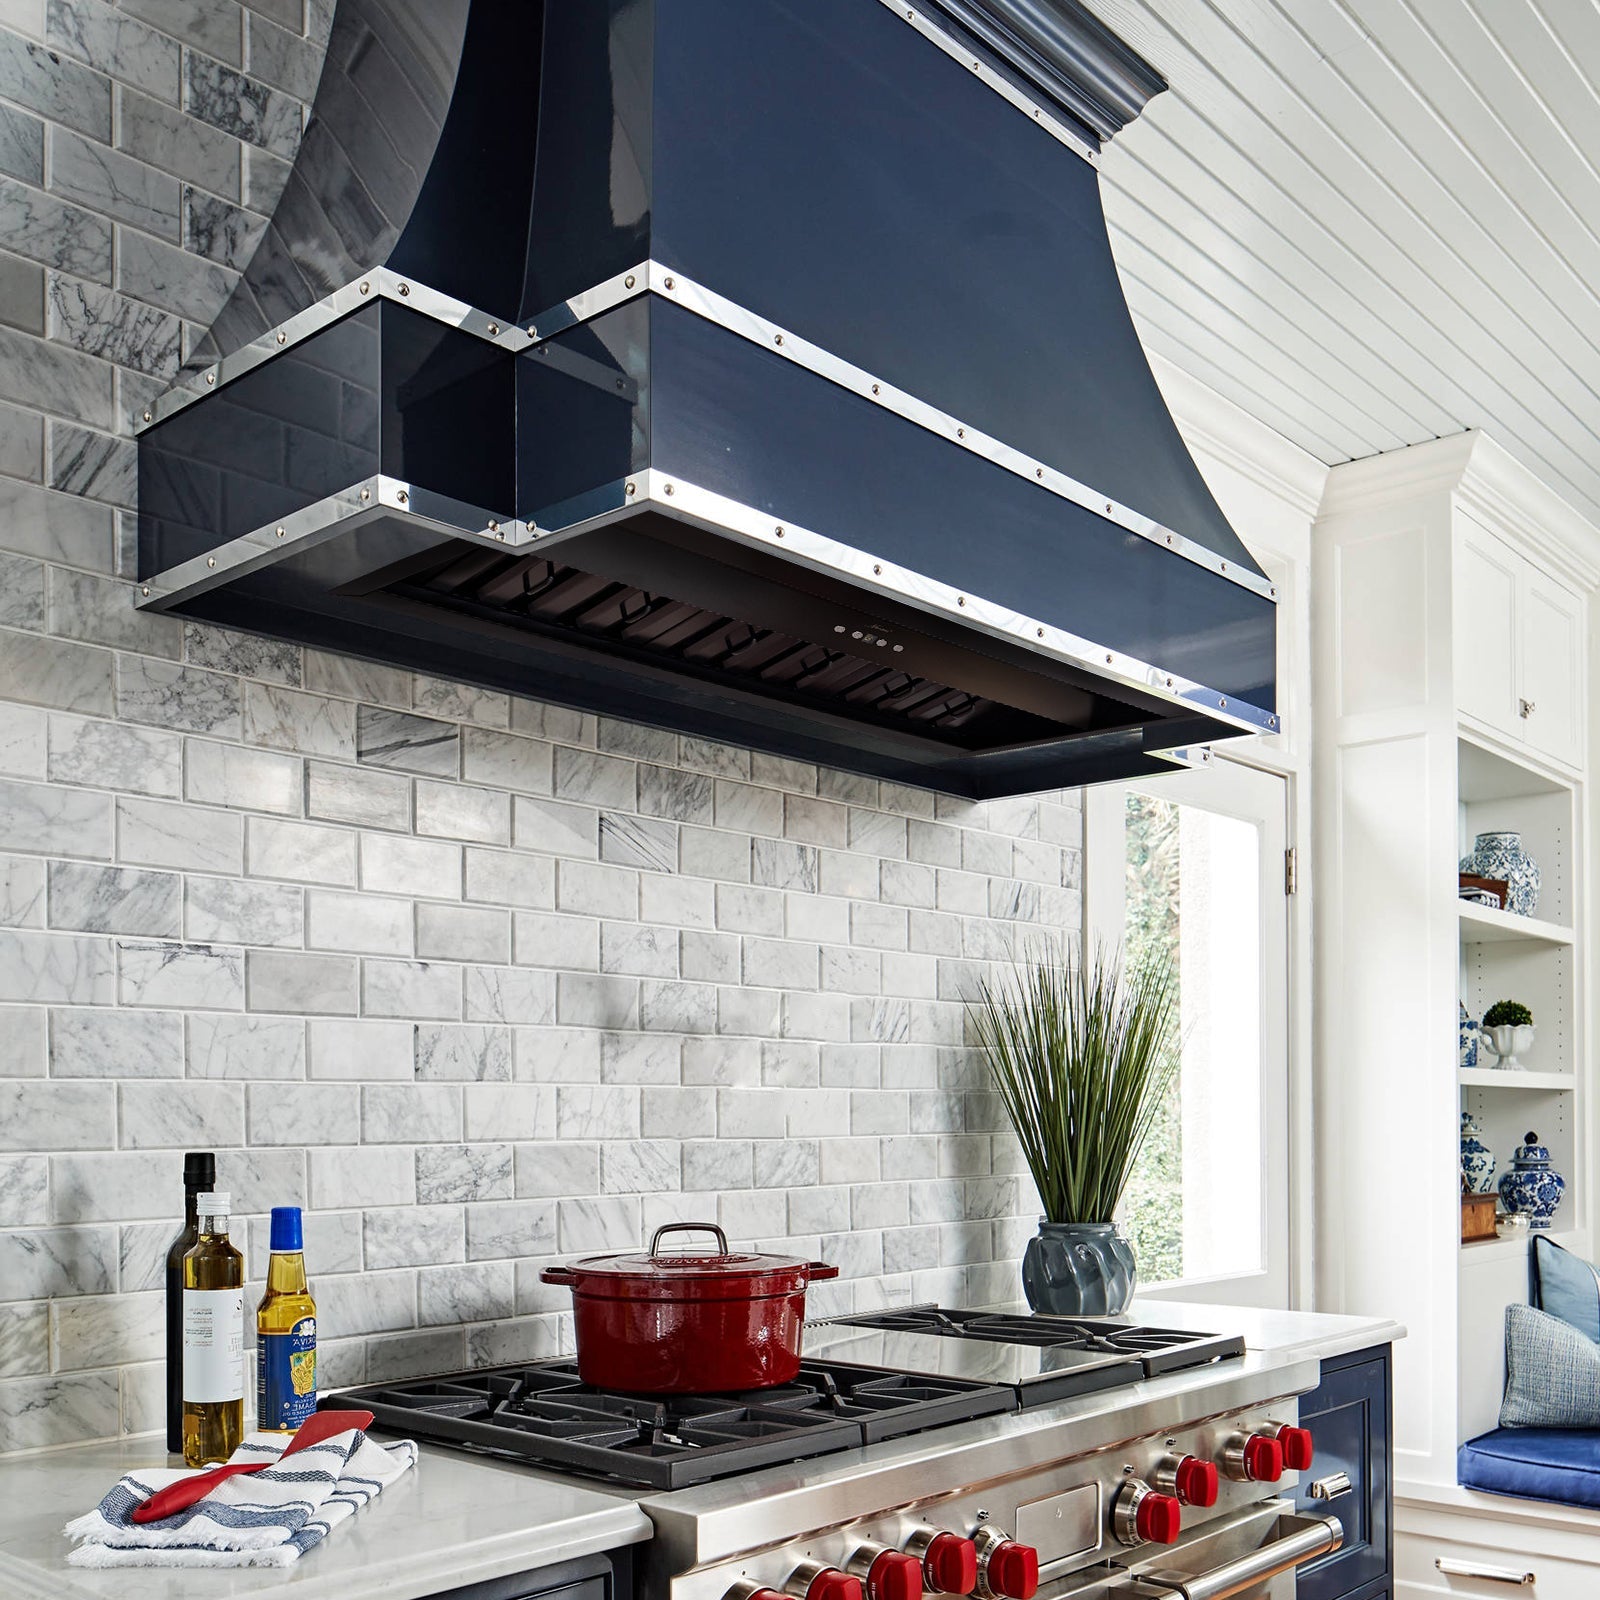 30 Inch Range Hood Insert, Ultra Quiet Stainless Steel Ducted Insert/Built-in Kitchen Vent Hood with Powerful Suction, Dimmable LED Lights and Dishwasher Safe Filters, 600 CFM - Matte Black